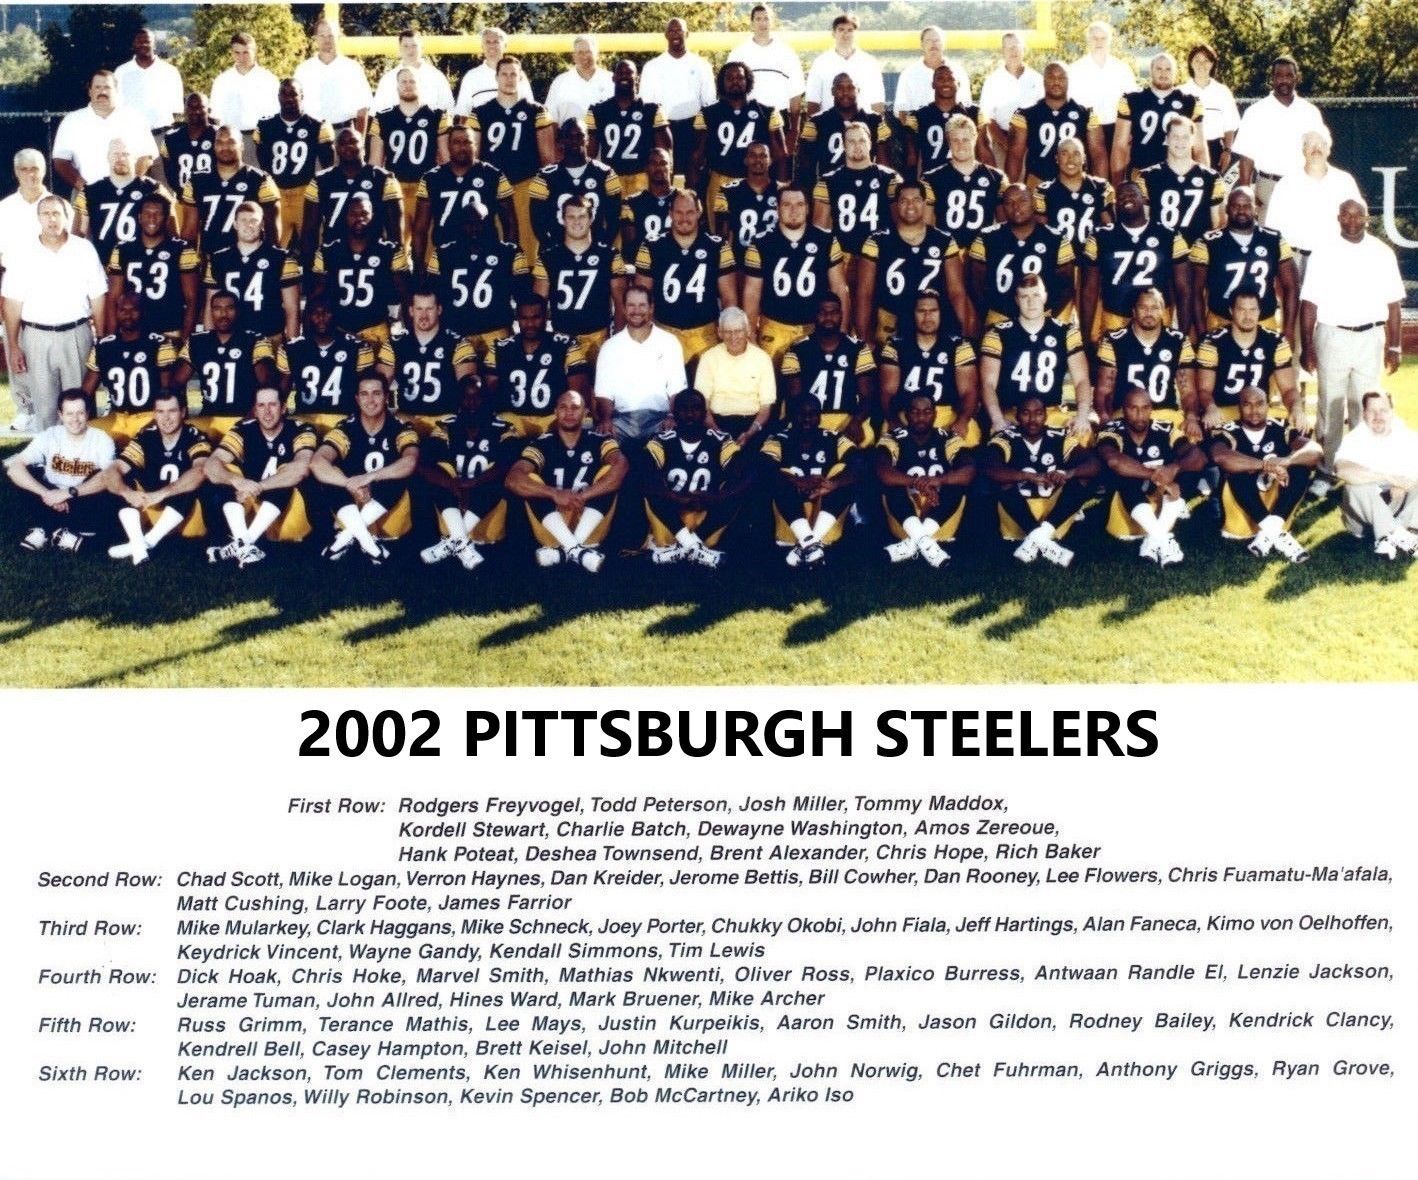 2002 PITTSBURGH STEELERS 8X10 TEAM PHOTO FOOTBALL PICTURE NFL - $4.94